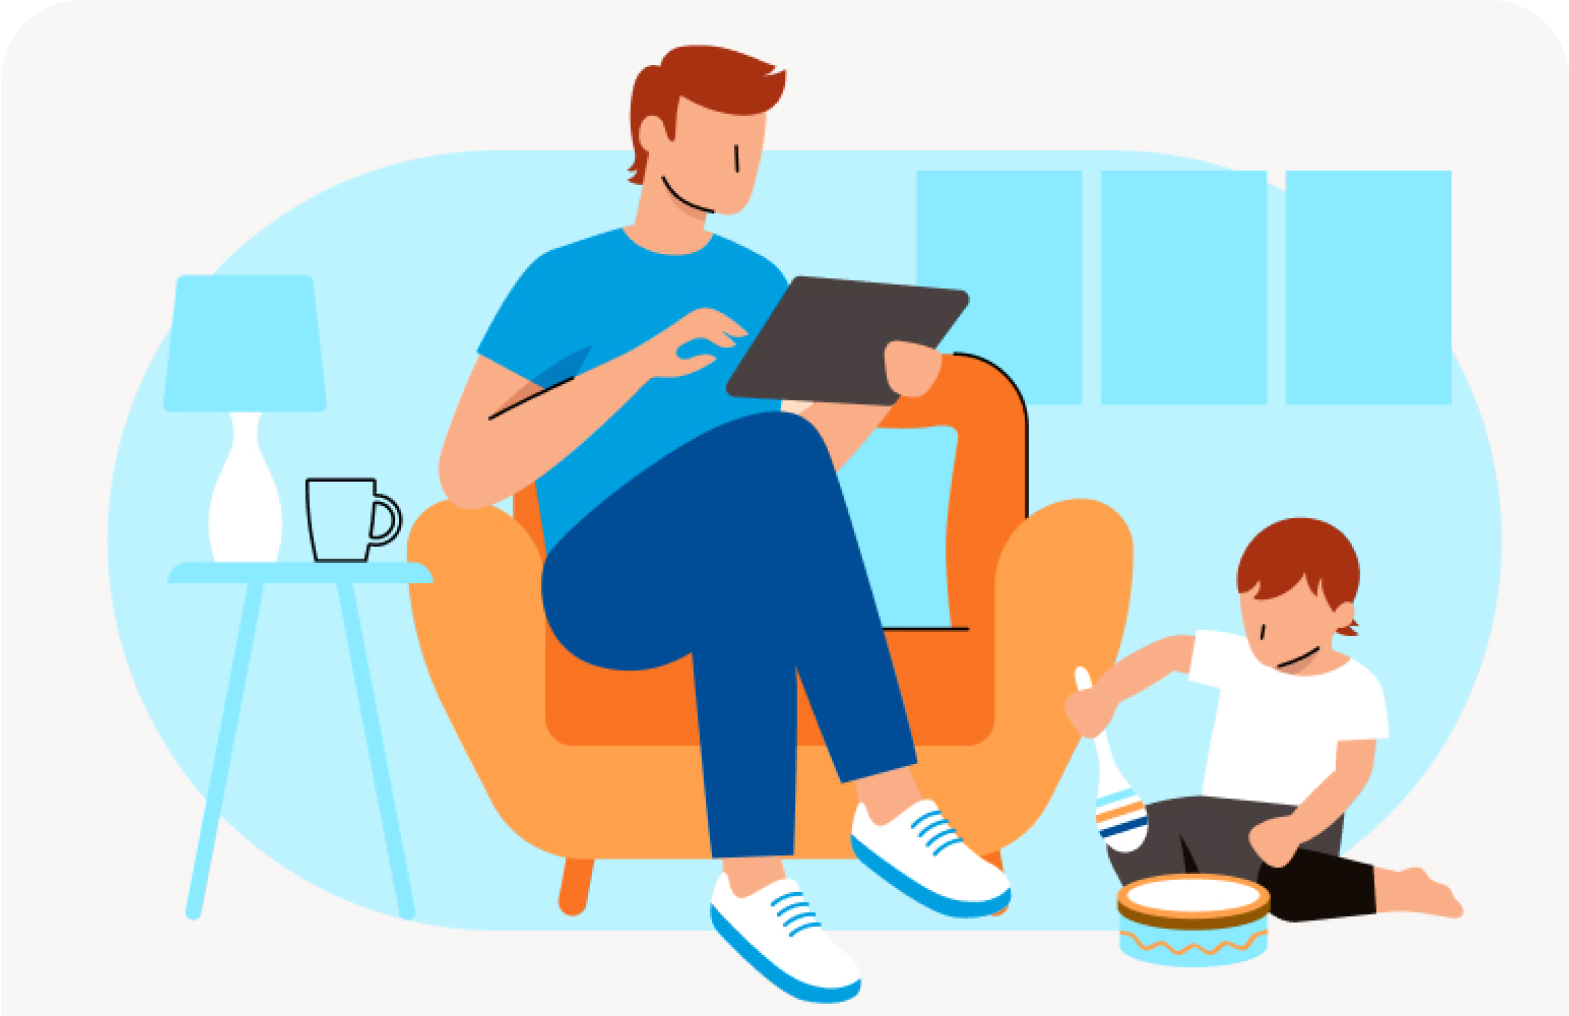 Illustrated image of a man sitting in a chair looking at a tablet and a boy sitting on the floor beside him playing with a drum